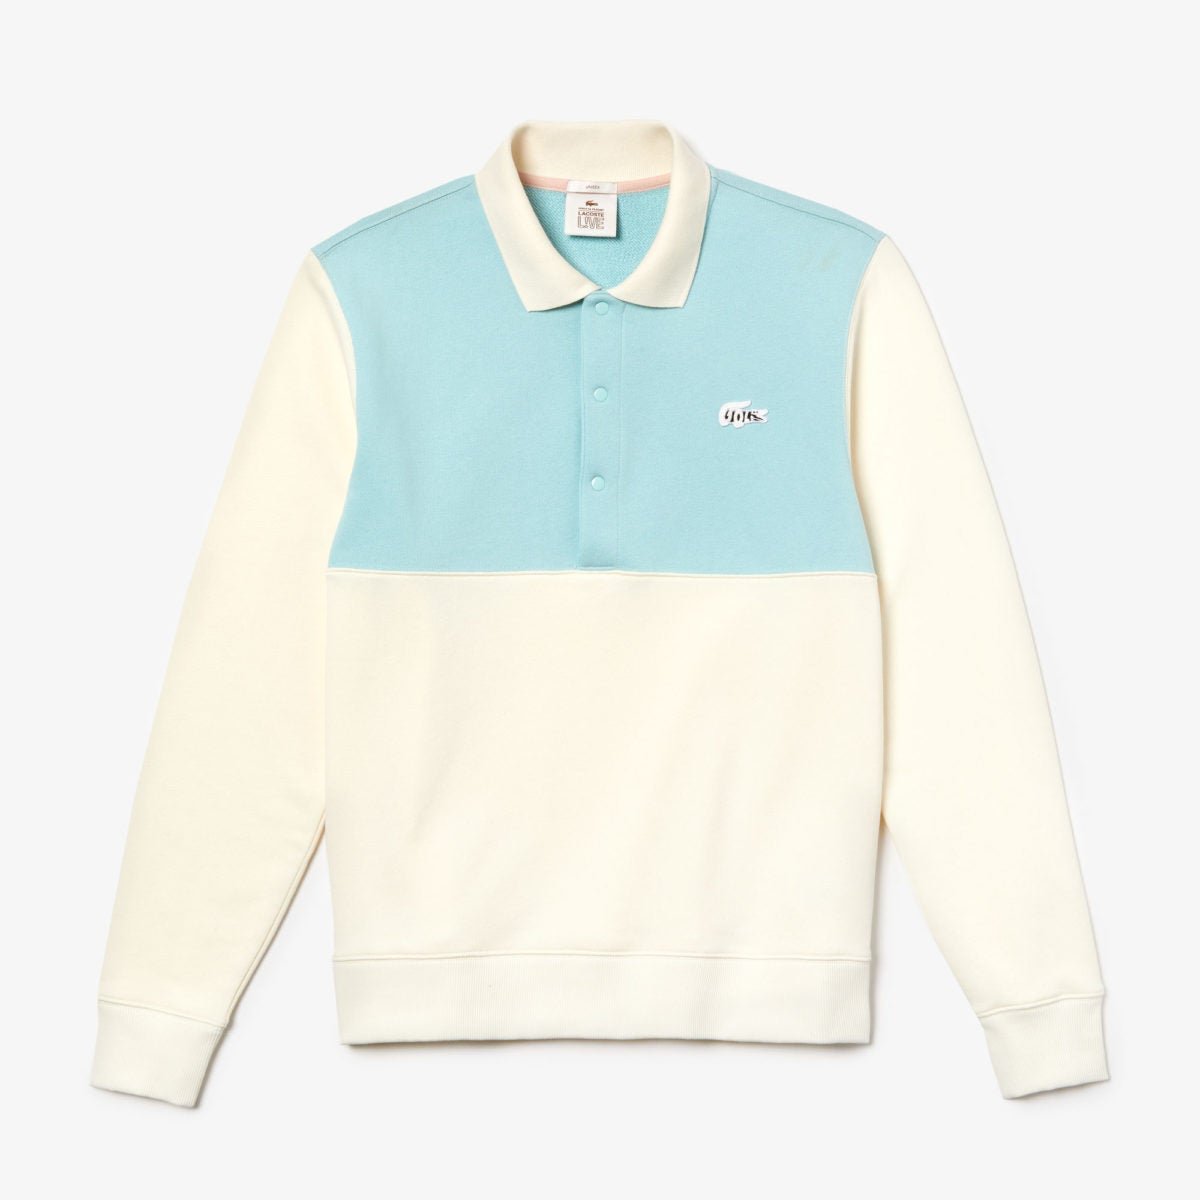 Poesi operatør pizza Tyler, The Creator's Golf Le Fleur Collaborates With Lacoste For A Capsule  Collection | Essence